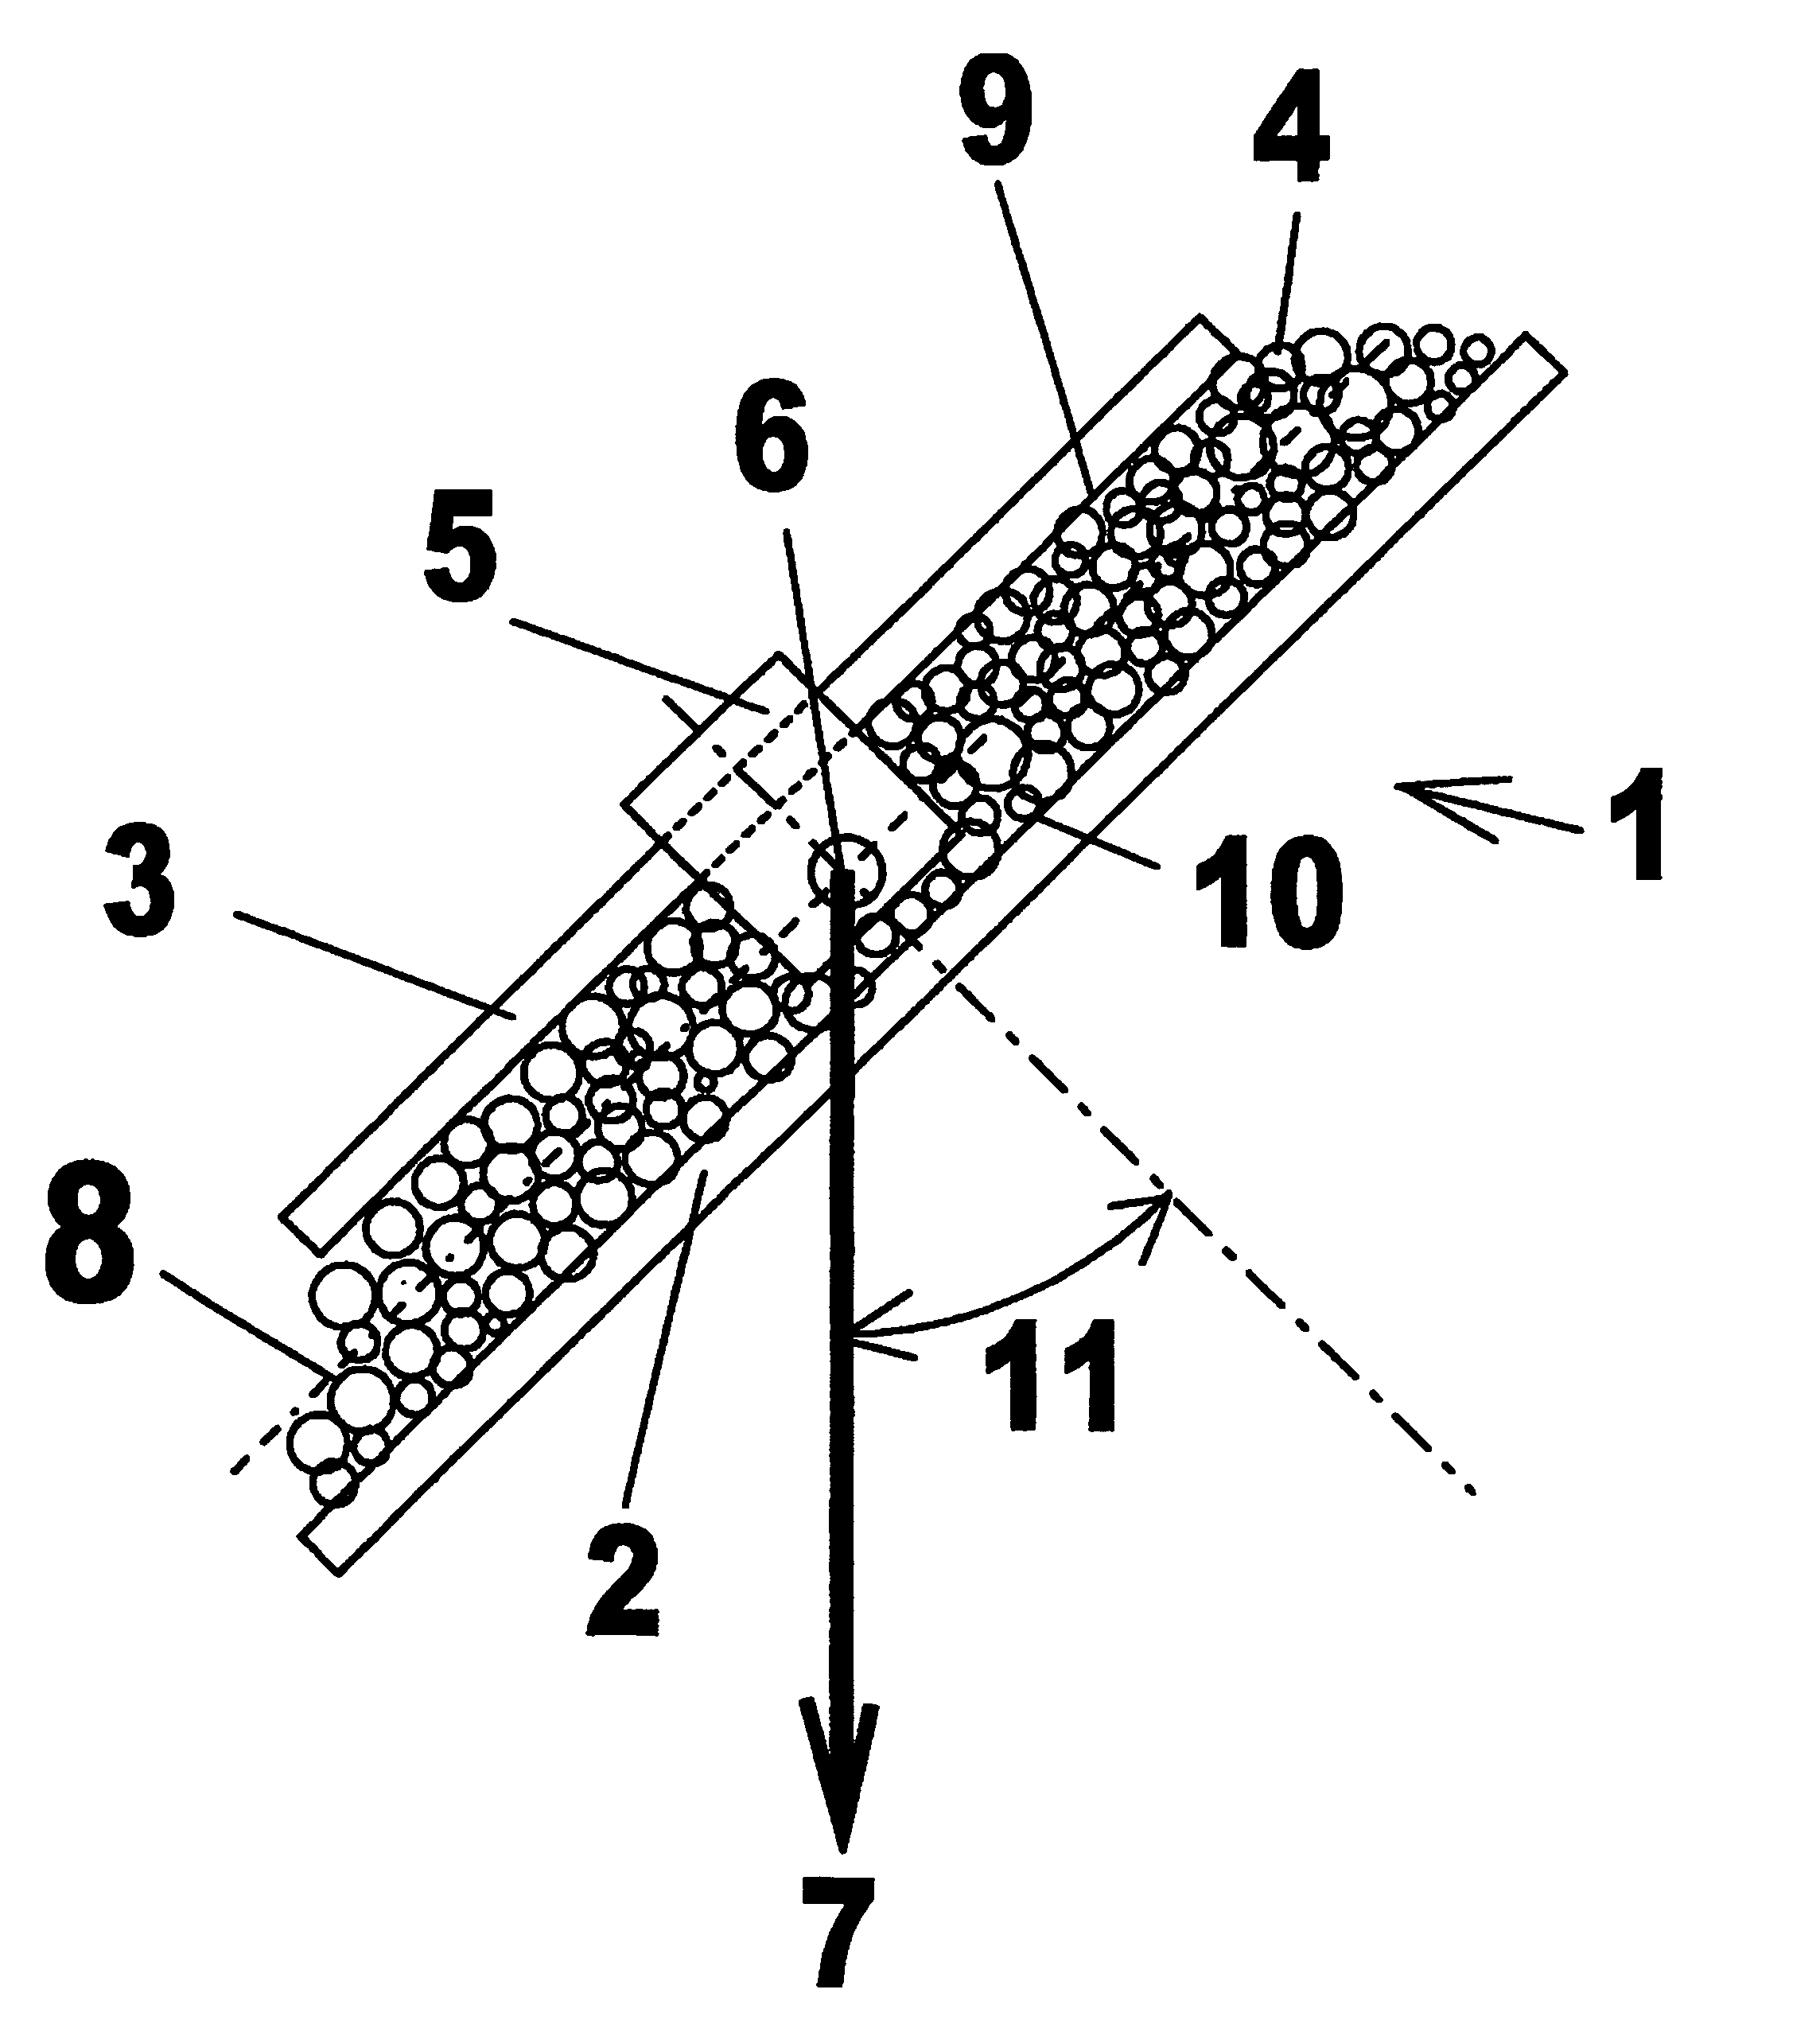 Apparatus and test procedure for measuring the cohesive, adhesive, and frictional properties of bulk granular solids